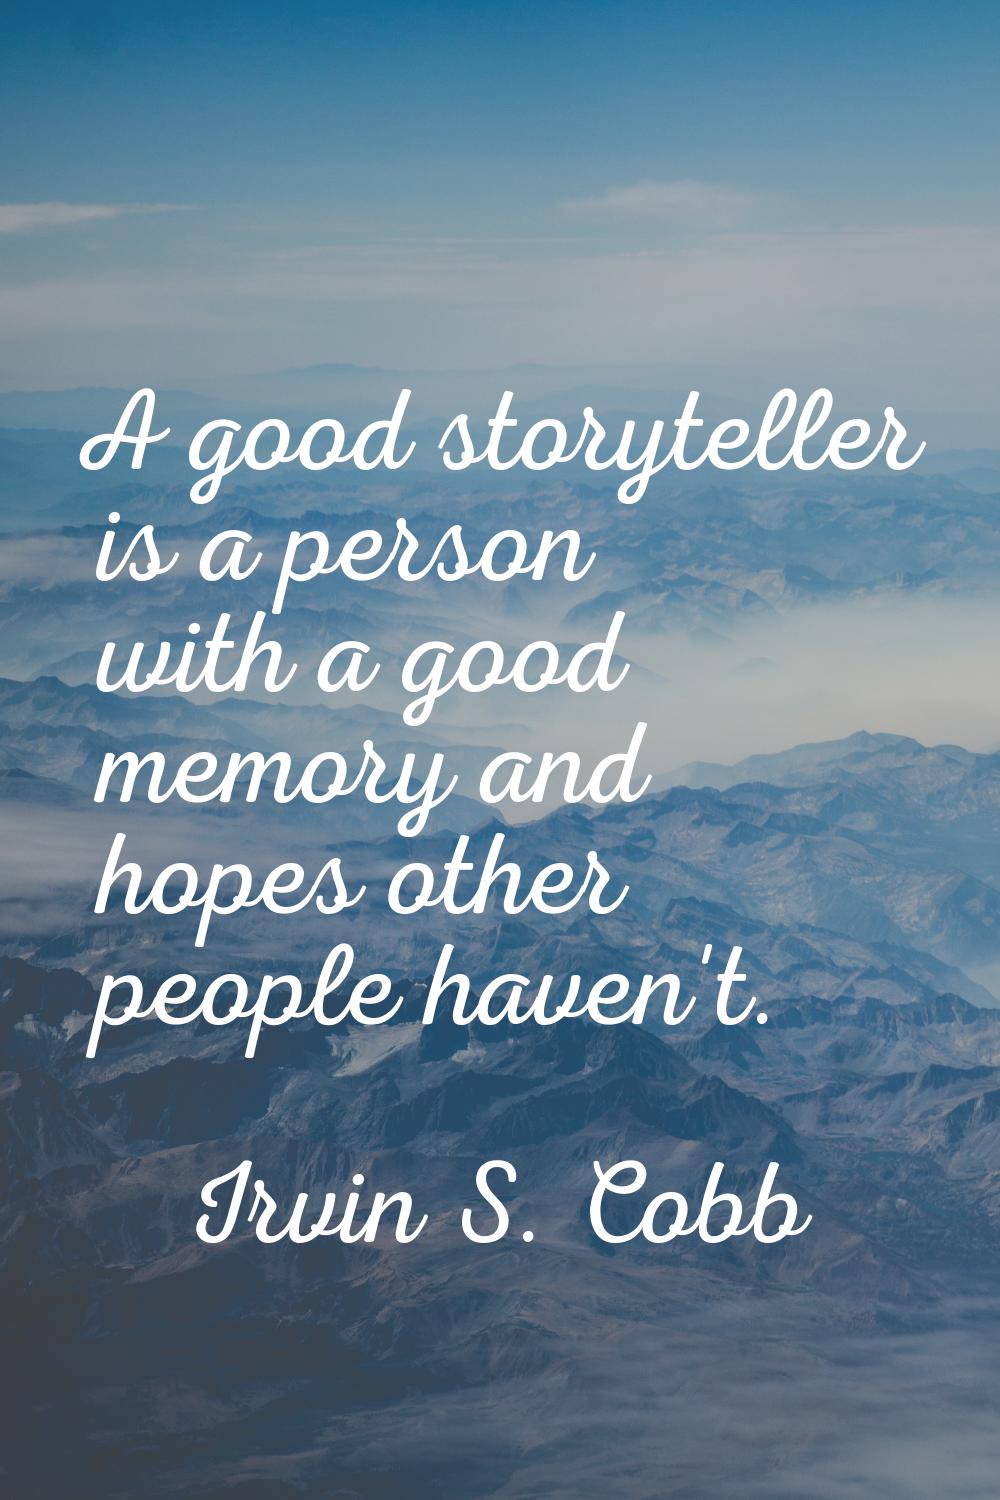 A good storyteller is a person with a good memory and hopes other people haven't.